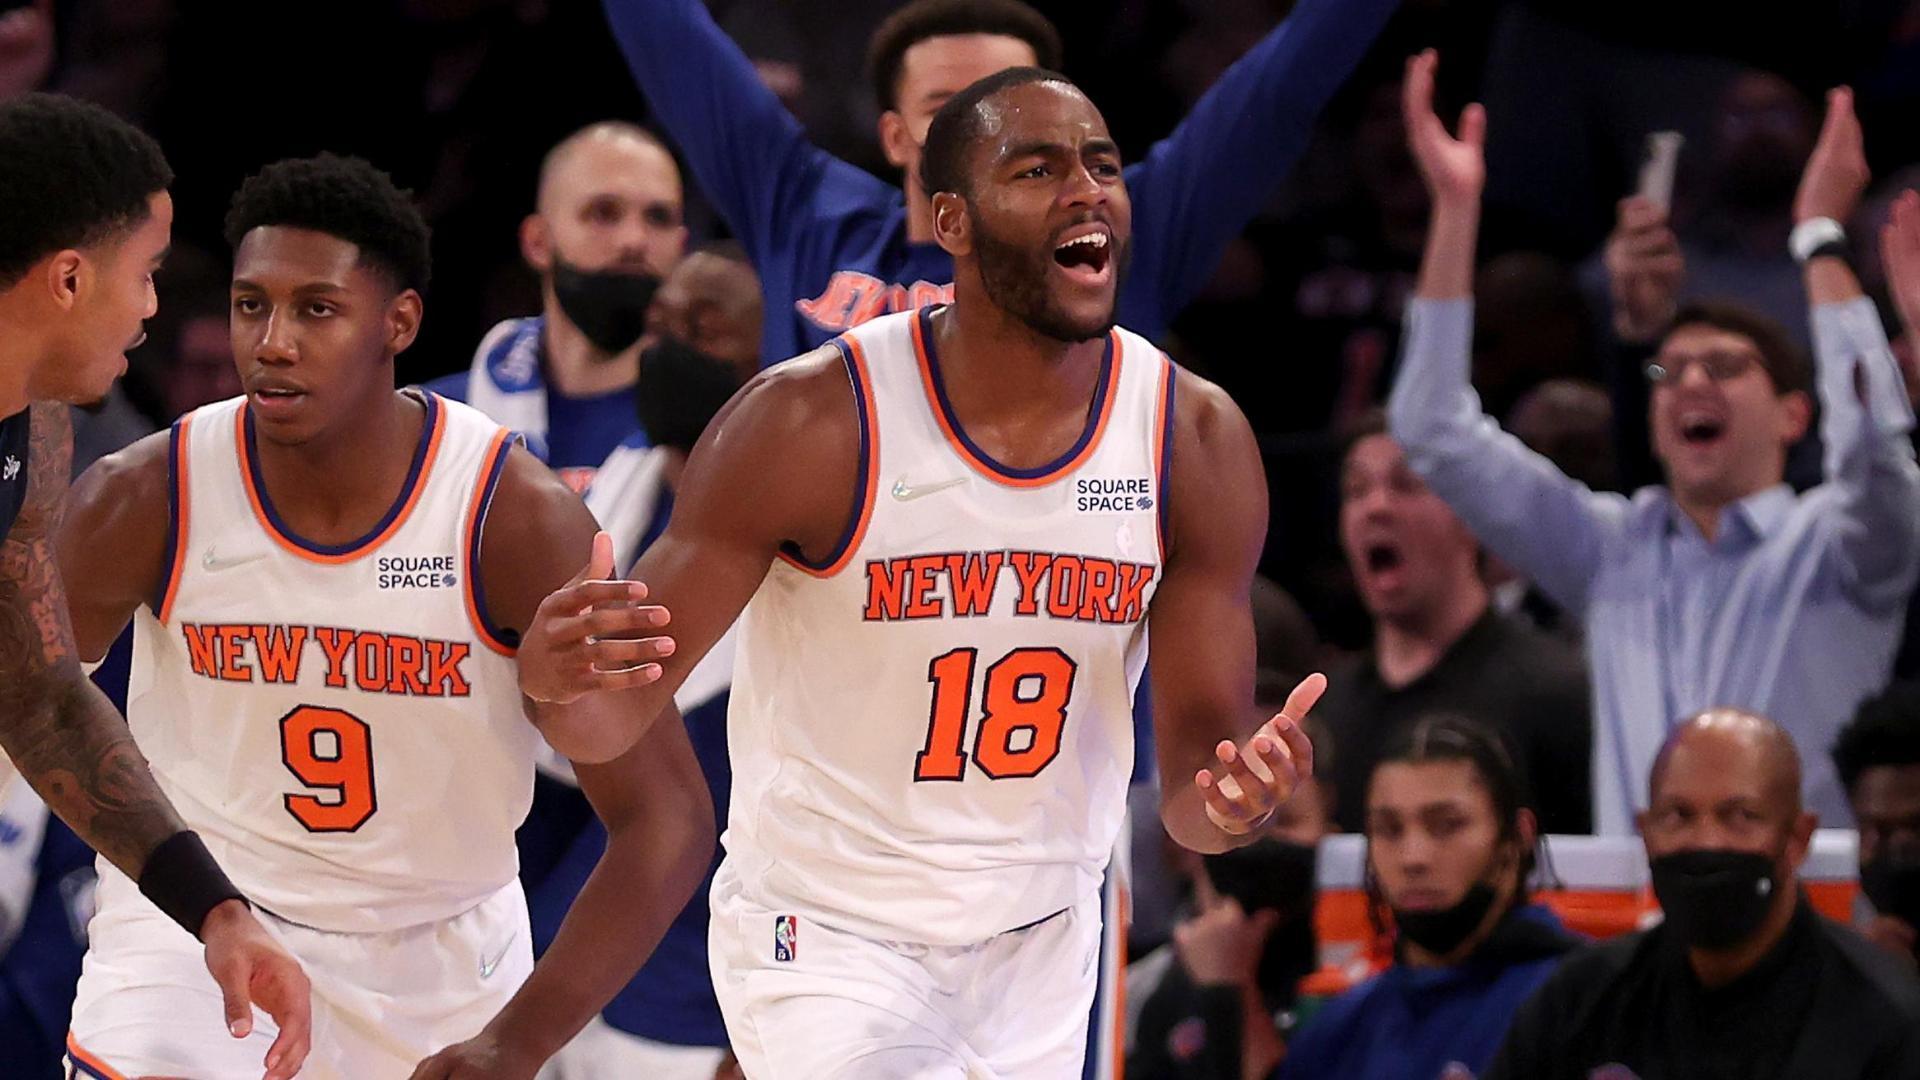 Hot shooting from Alec Burks leads Knicks to win